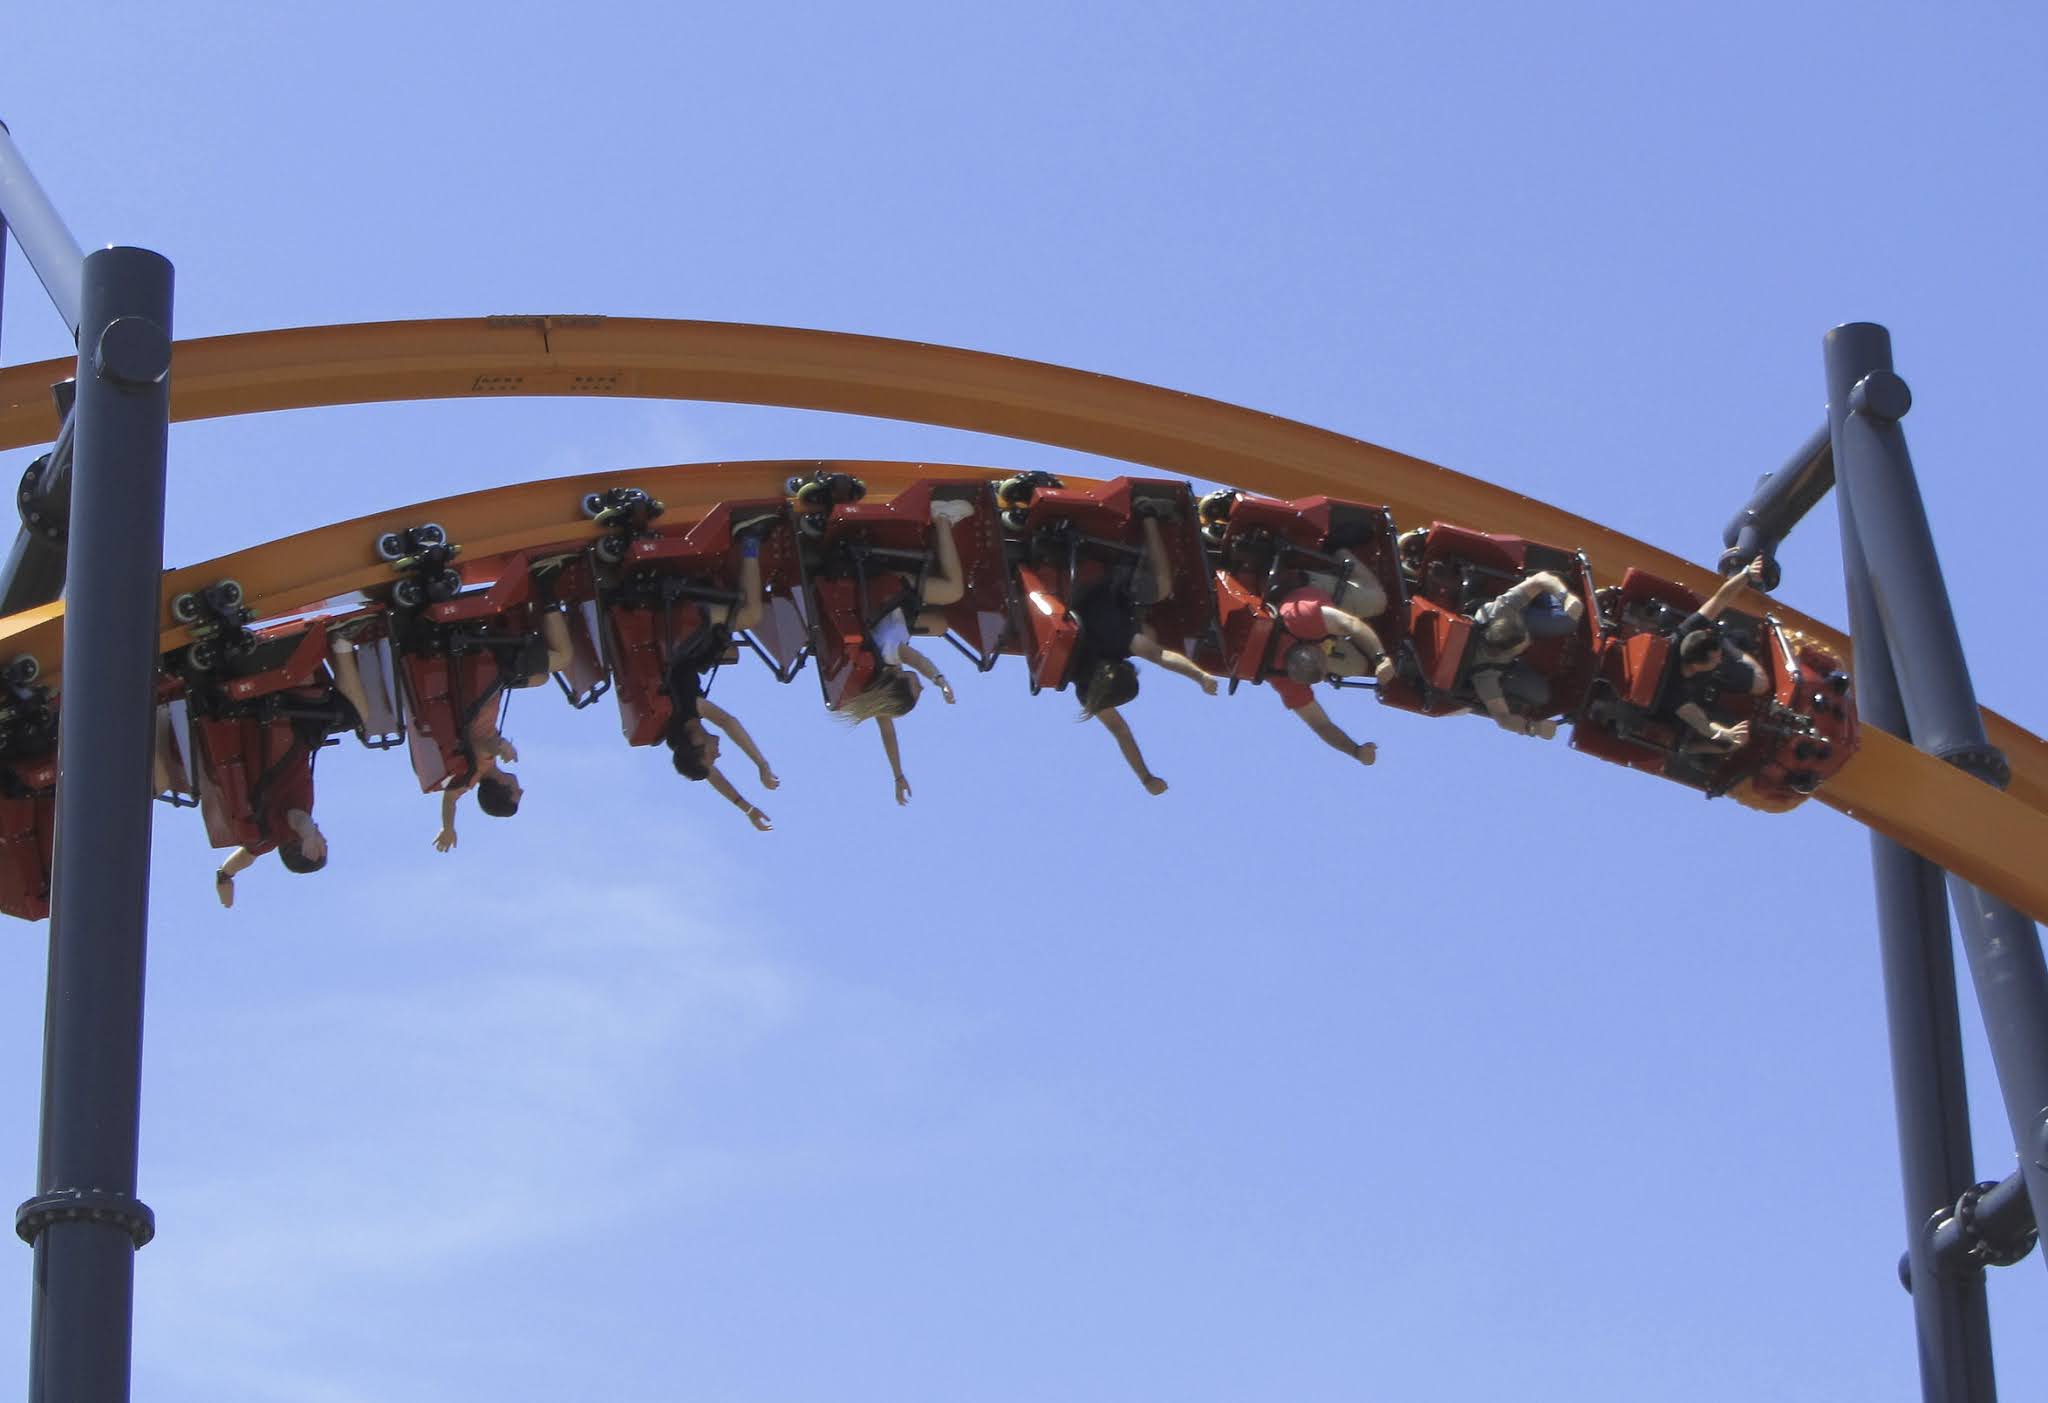 Great Adventure Opens Jersey Devil Coaster - American Coaster Enthusiasts  (ACE)